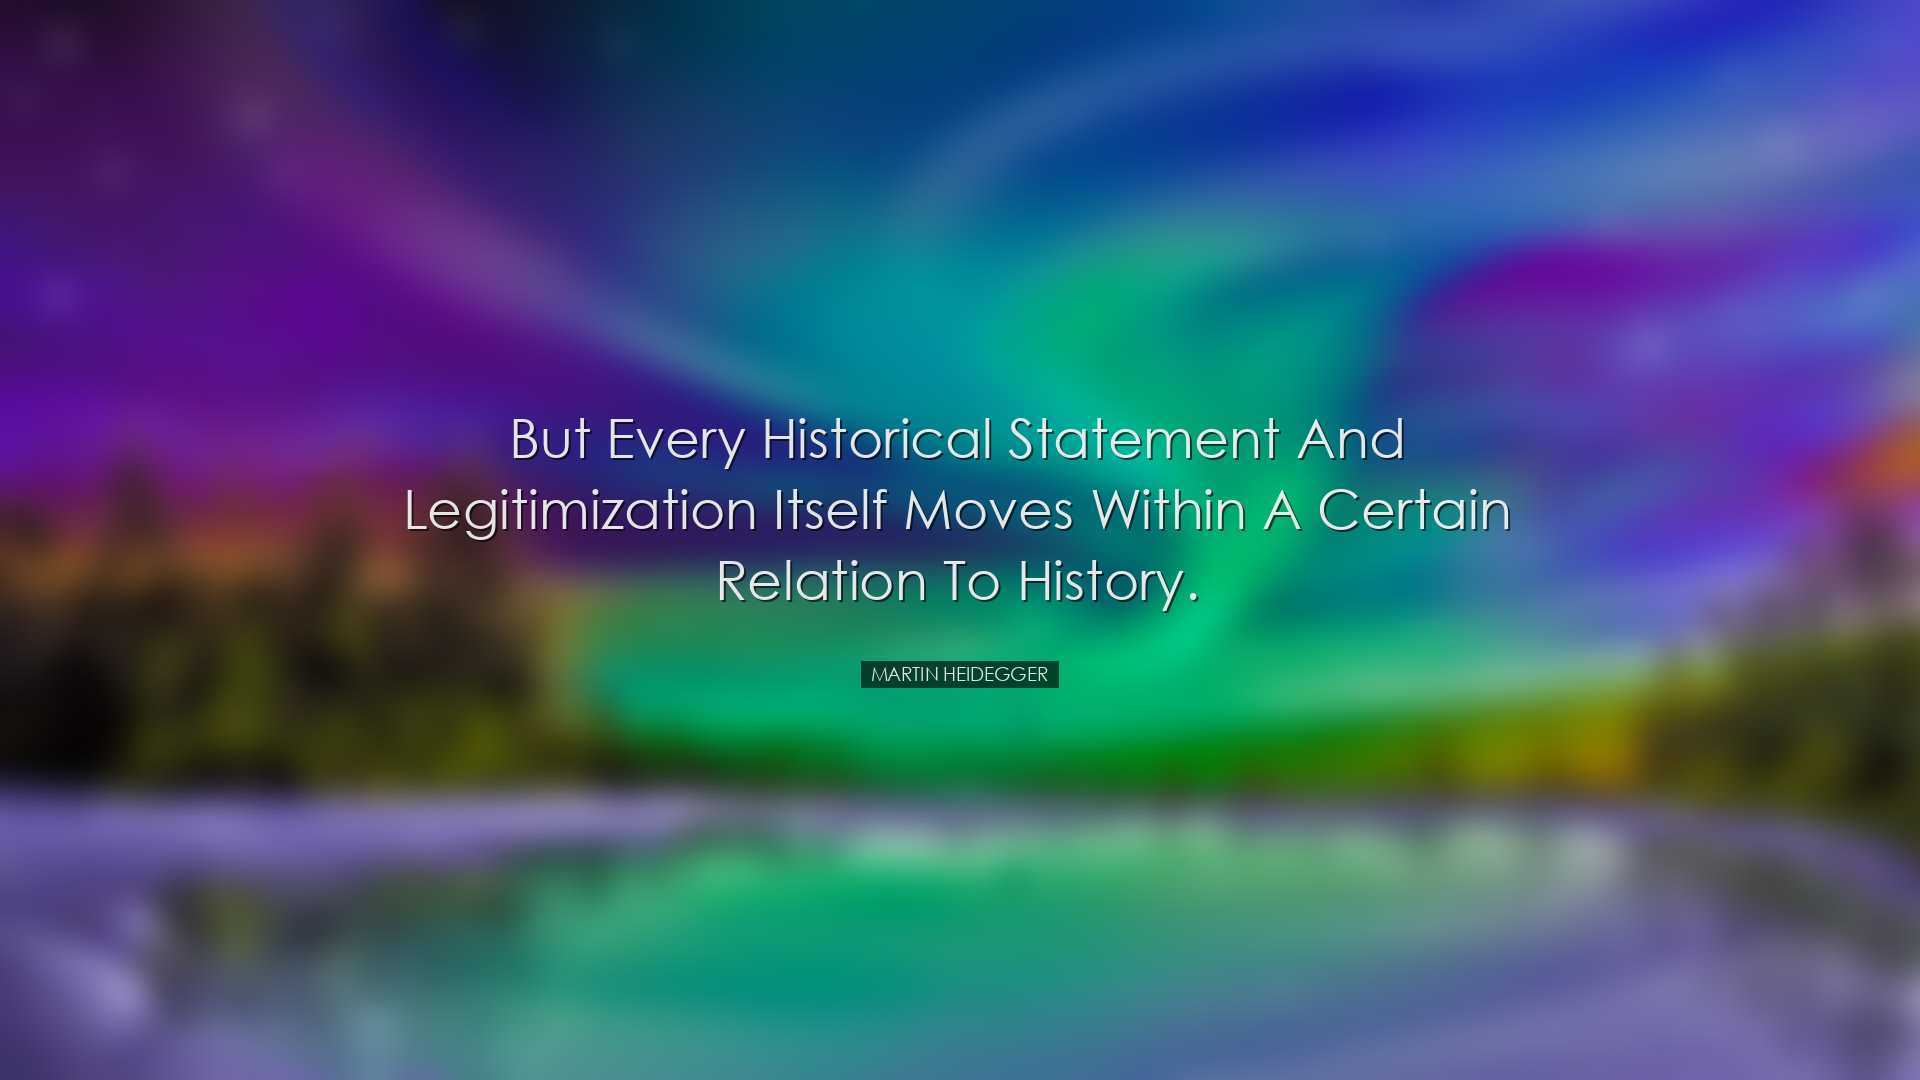 But every historical statement and legitimization itself moves wit